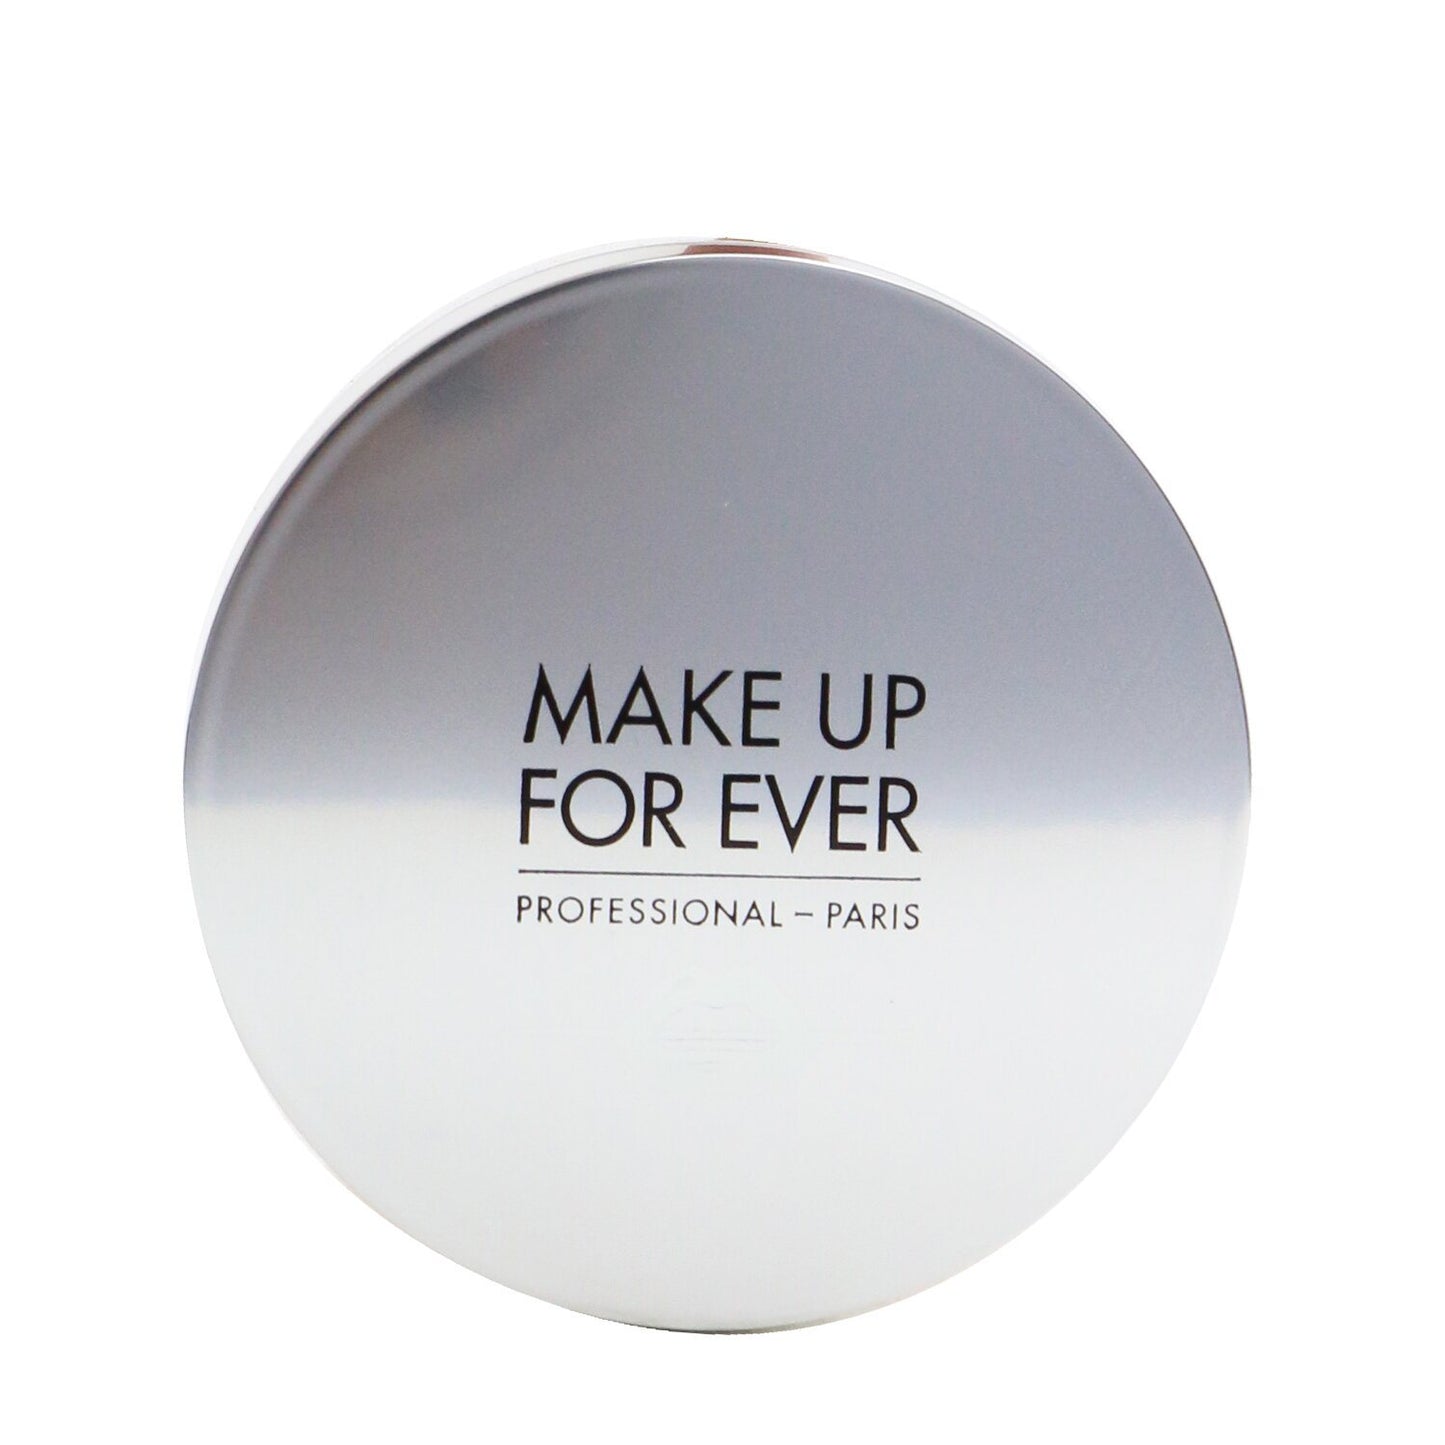 MAKE UP FOR EVER - Ultra HD Invisible Micro Setting Loose Powder - # 2.2 Light Neutral I000018622 / 174824 16g/0.56oz